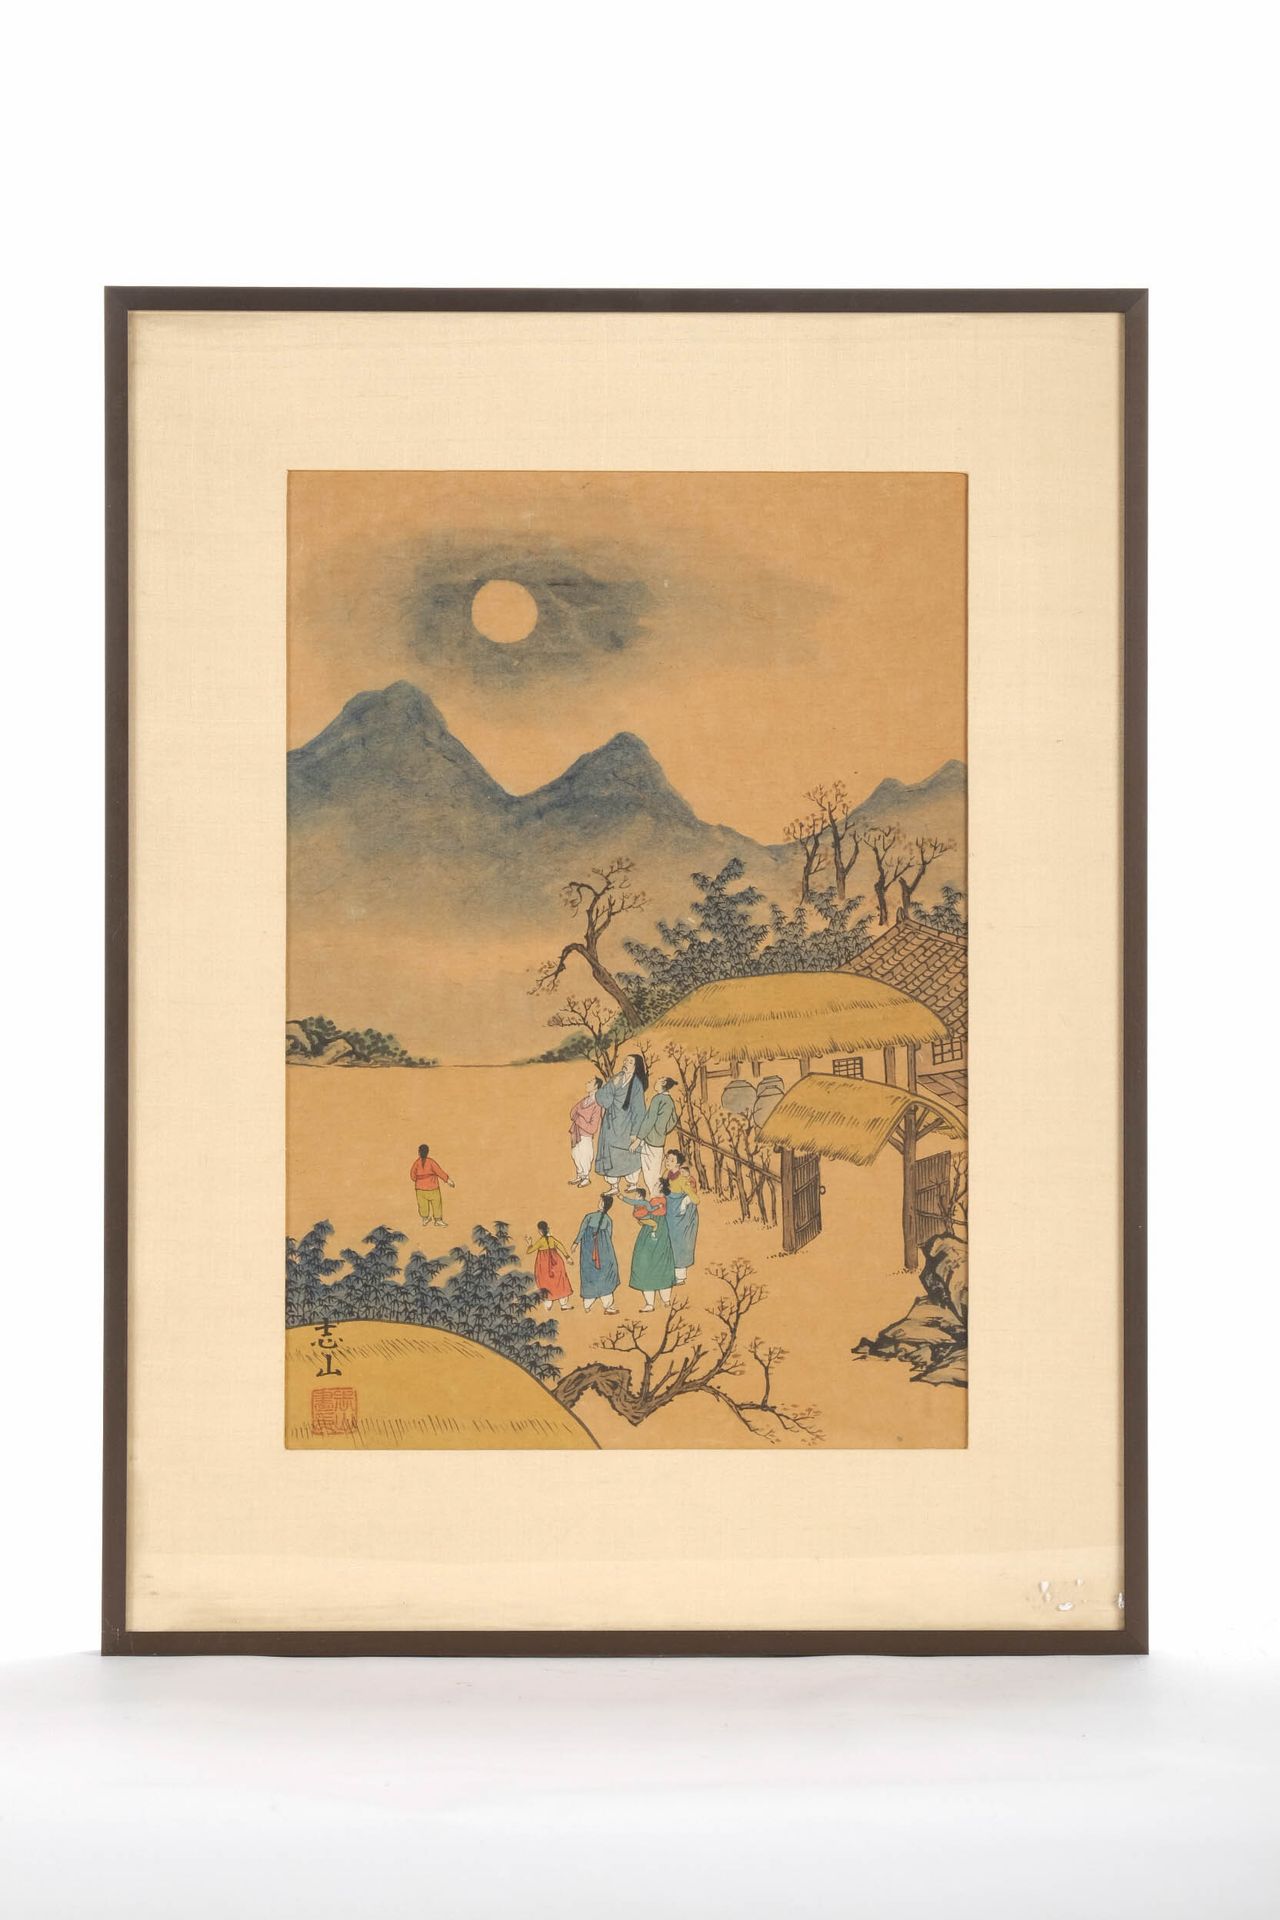 CHINE (CHINA, 中国) Drawing of animated Chinese landscape, framed, 39X28 cm.